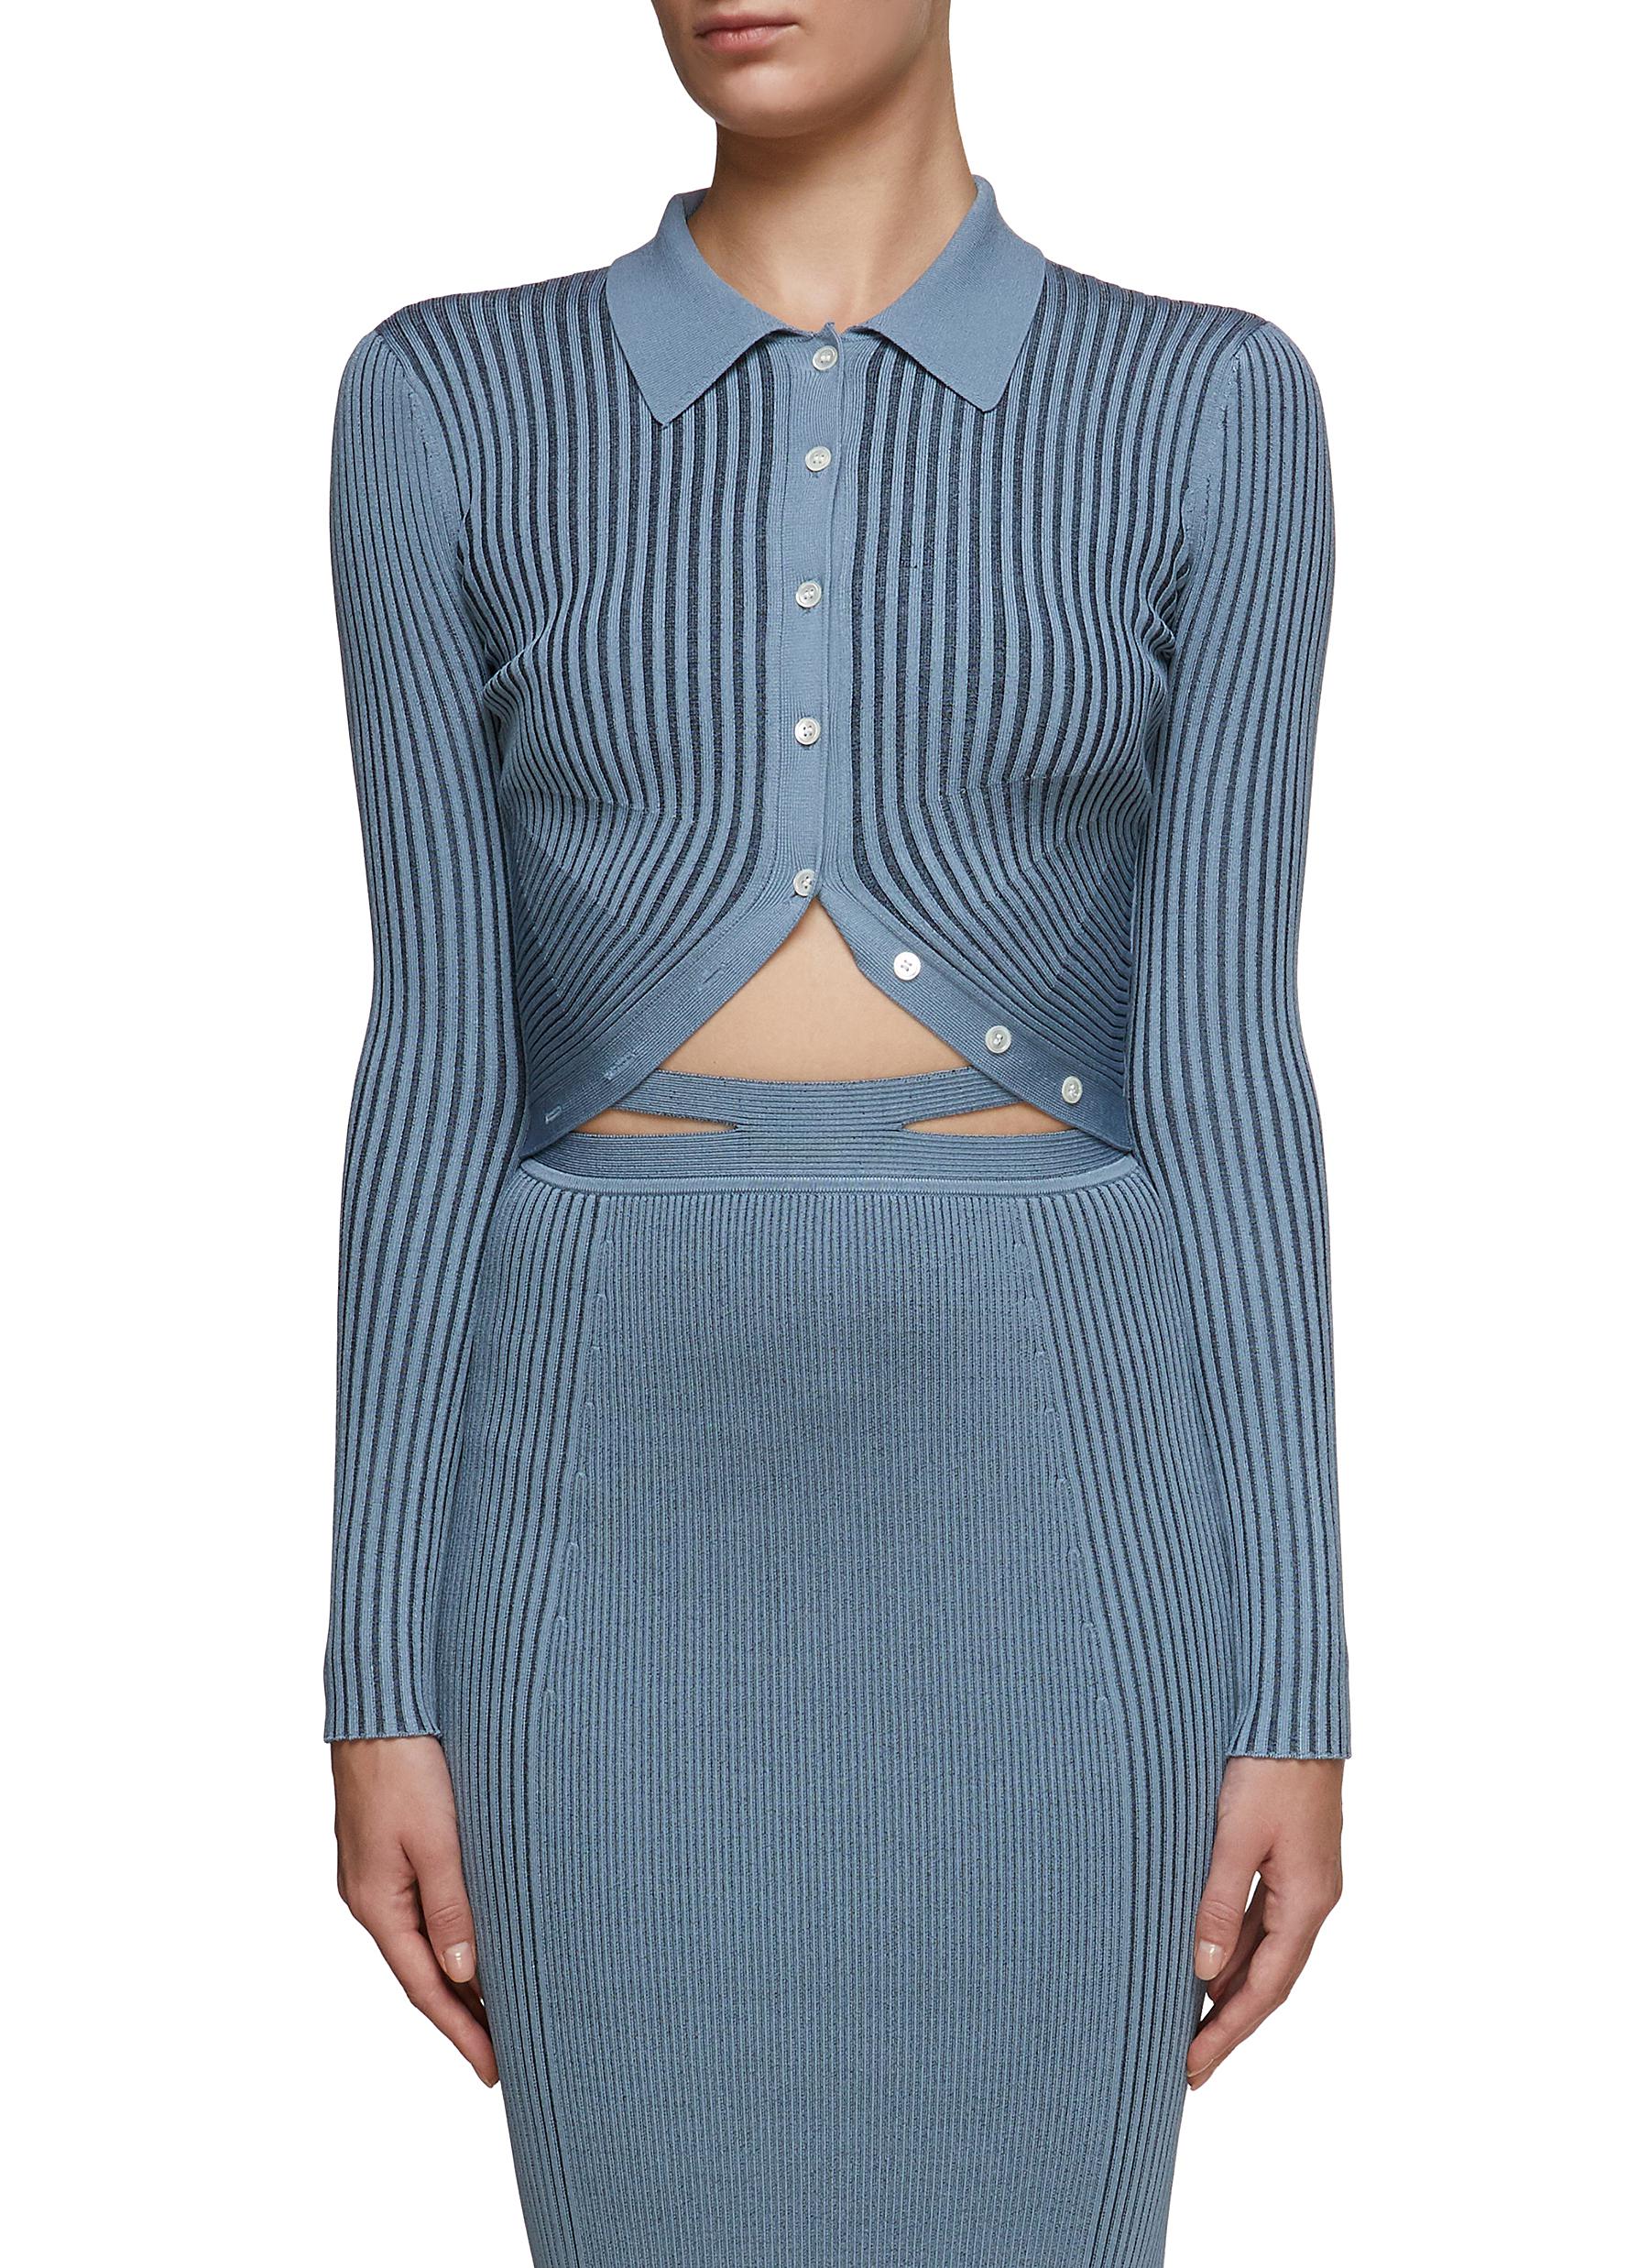 JONATHAN SIMKHAI ‘SOL' COMPACT BUTTON UP RIBBED KNIT CROPPED TOP